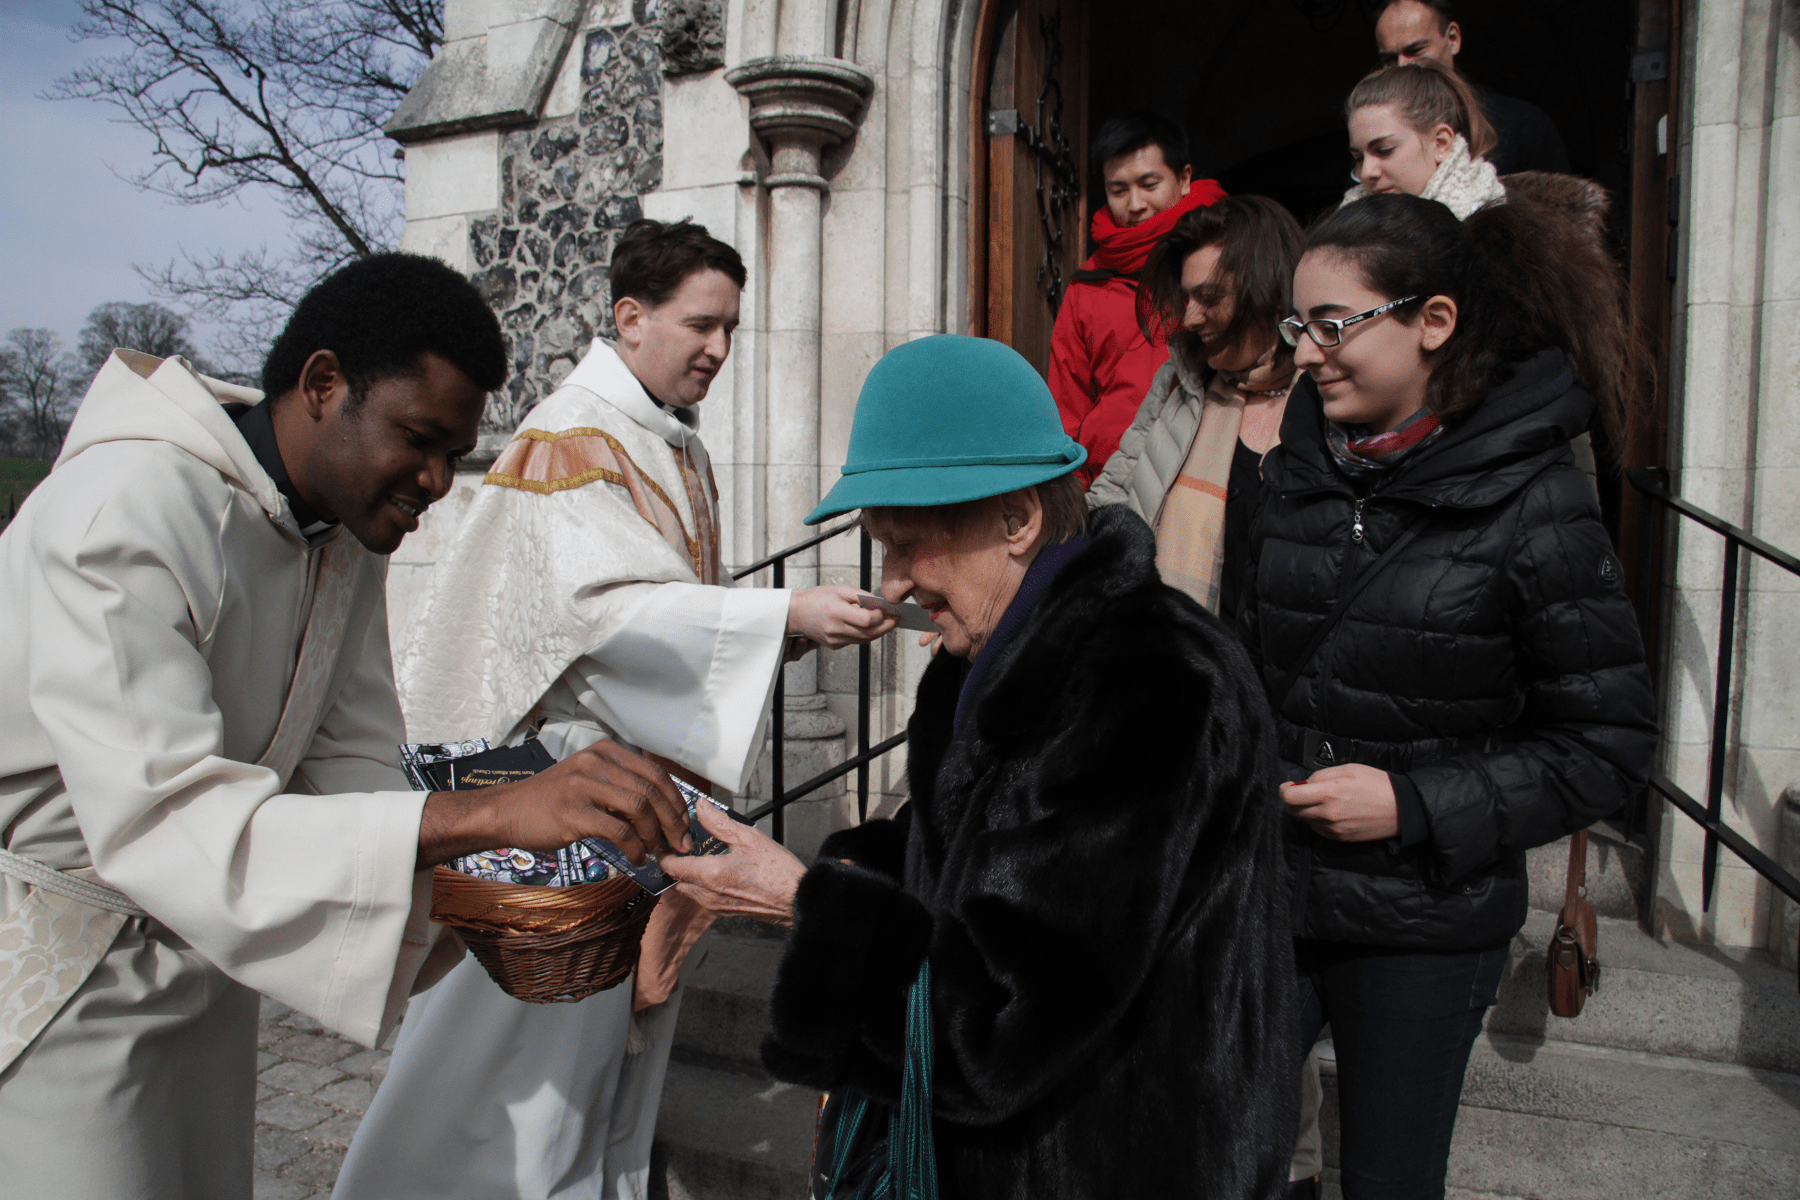 Out and About: Celebrating Easter with Christ and chocolate